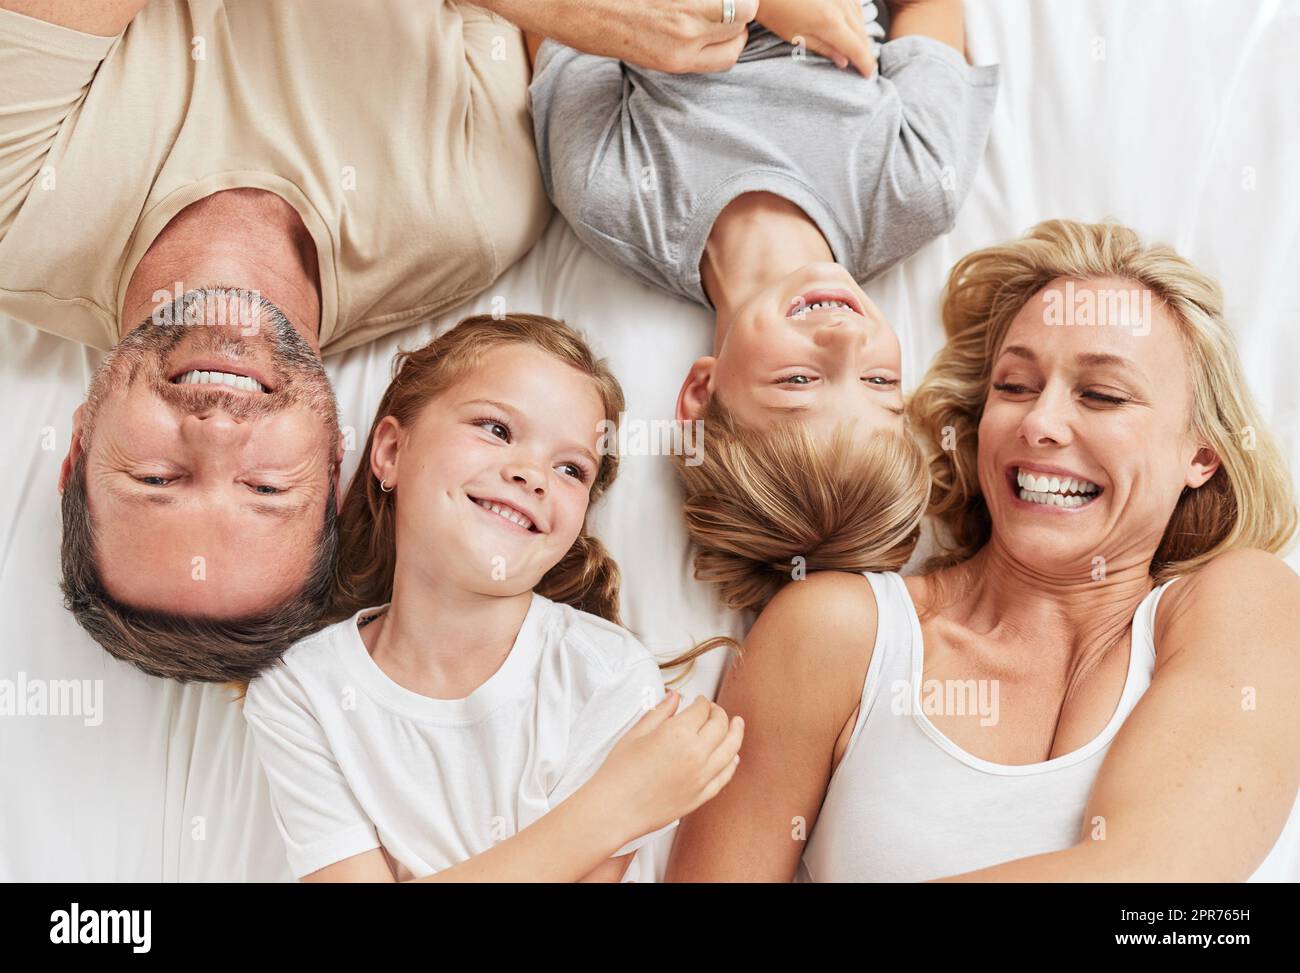 This is what were doing. Shot of a beautiful young family bonding in bed together. Stock Photo